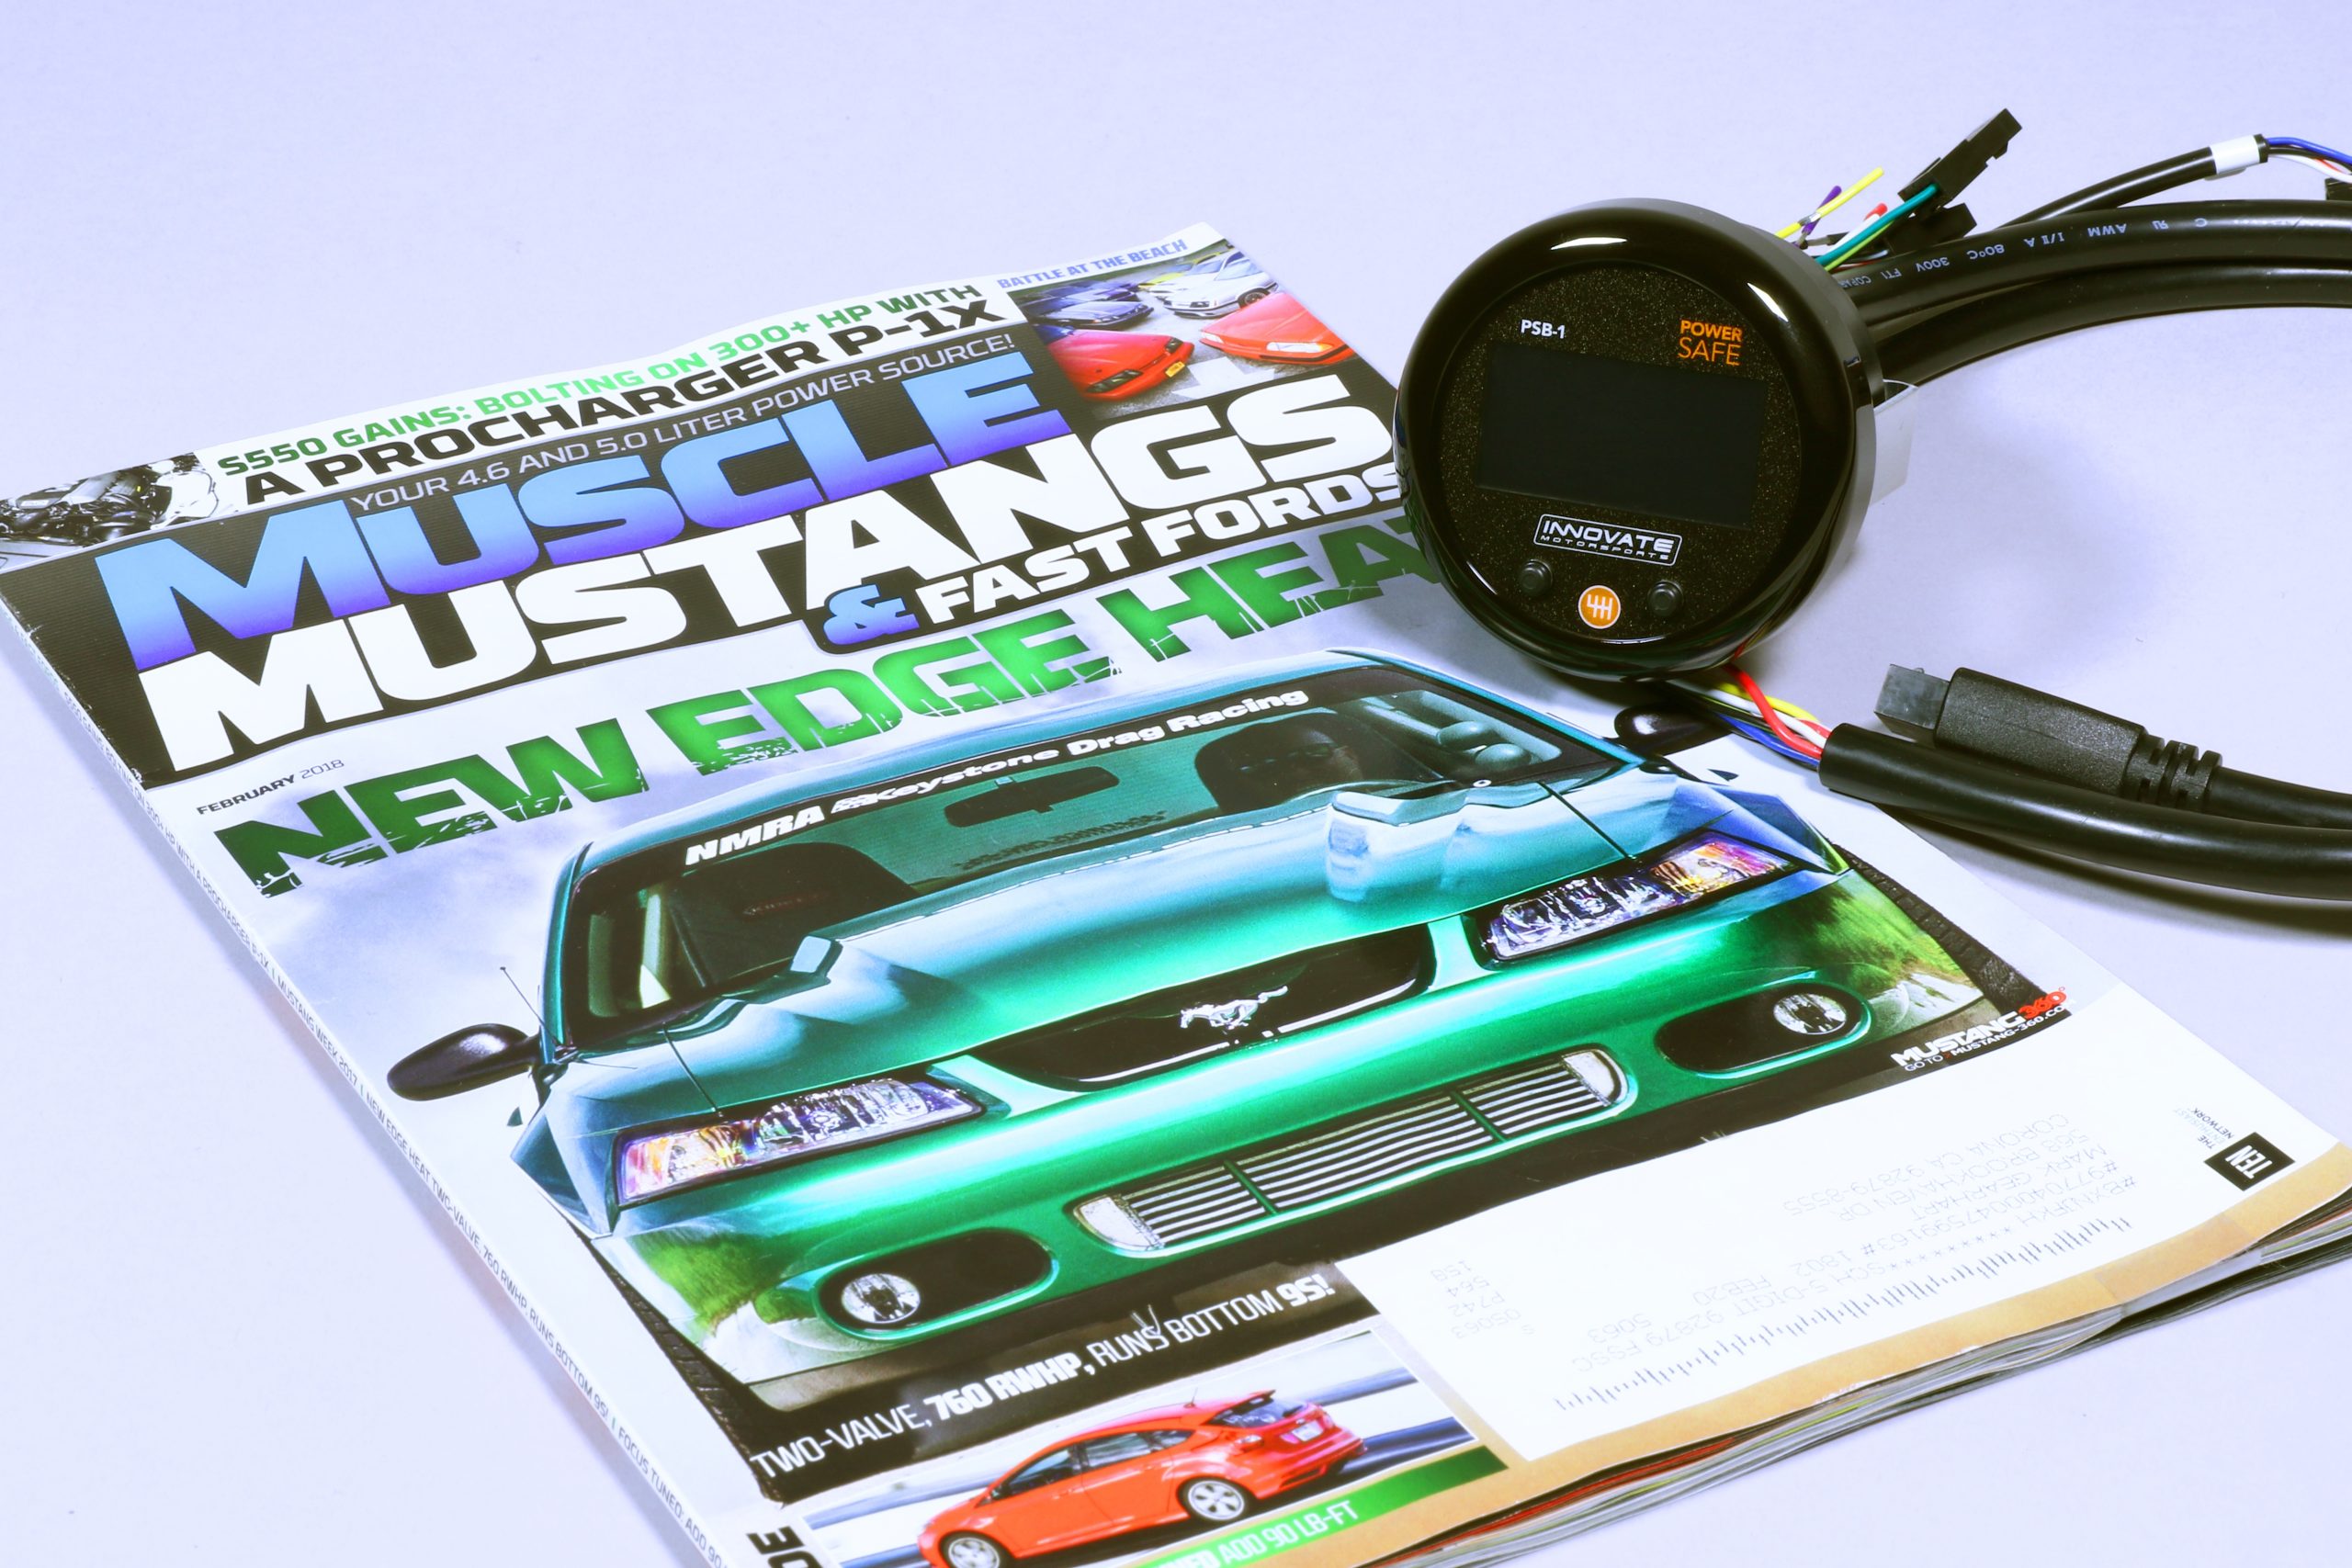 Muscle Mustangs And Fast Fords Magazine Installs an Innovate PSN-1 PowerSafe Nitrous Gauge